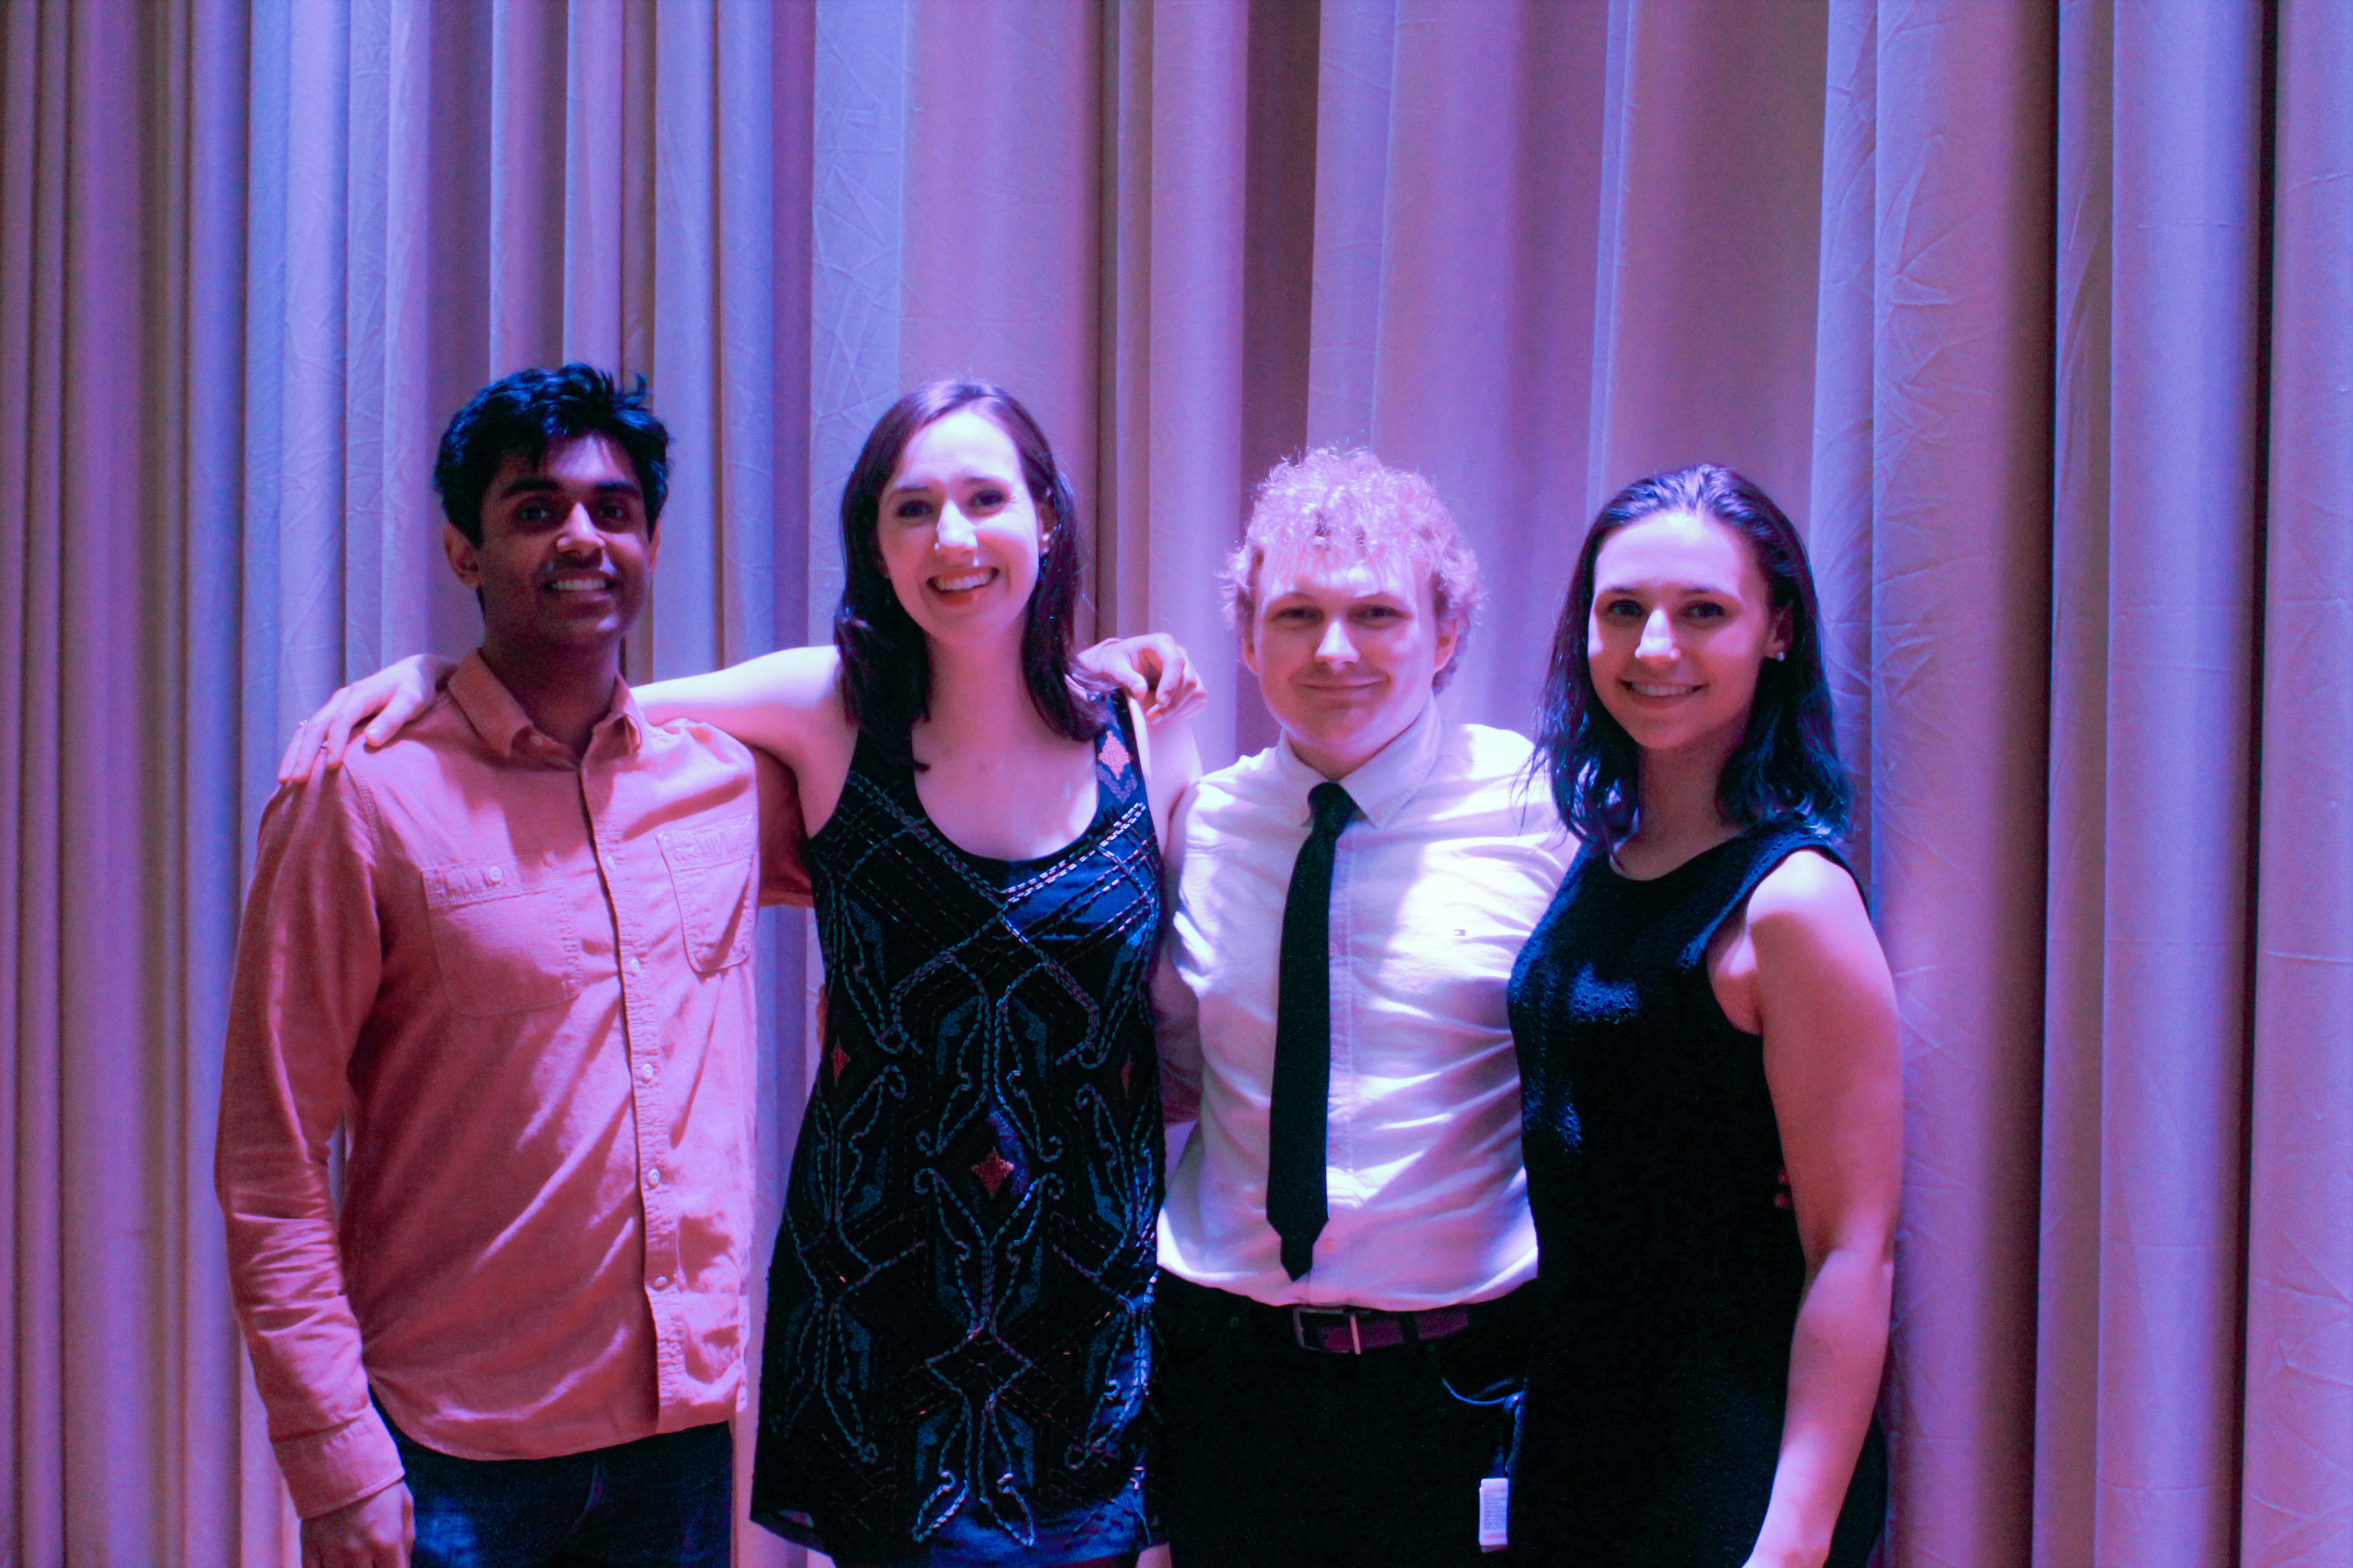 4 UConn dental students who provided music